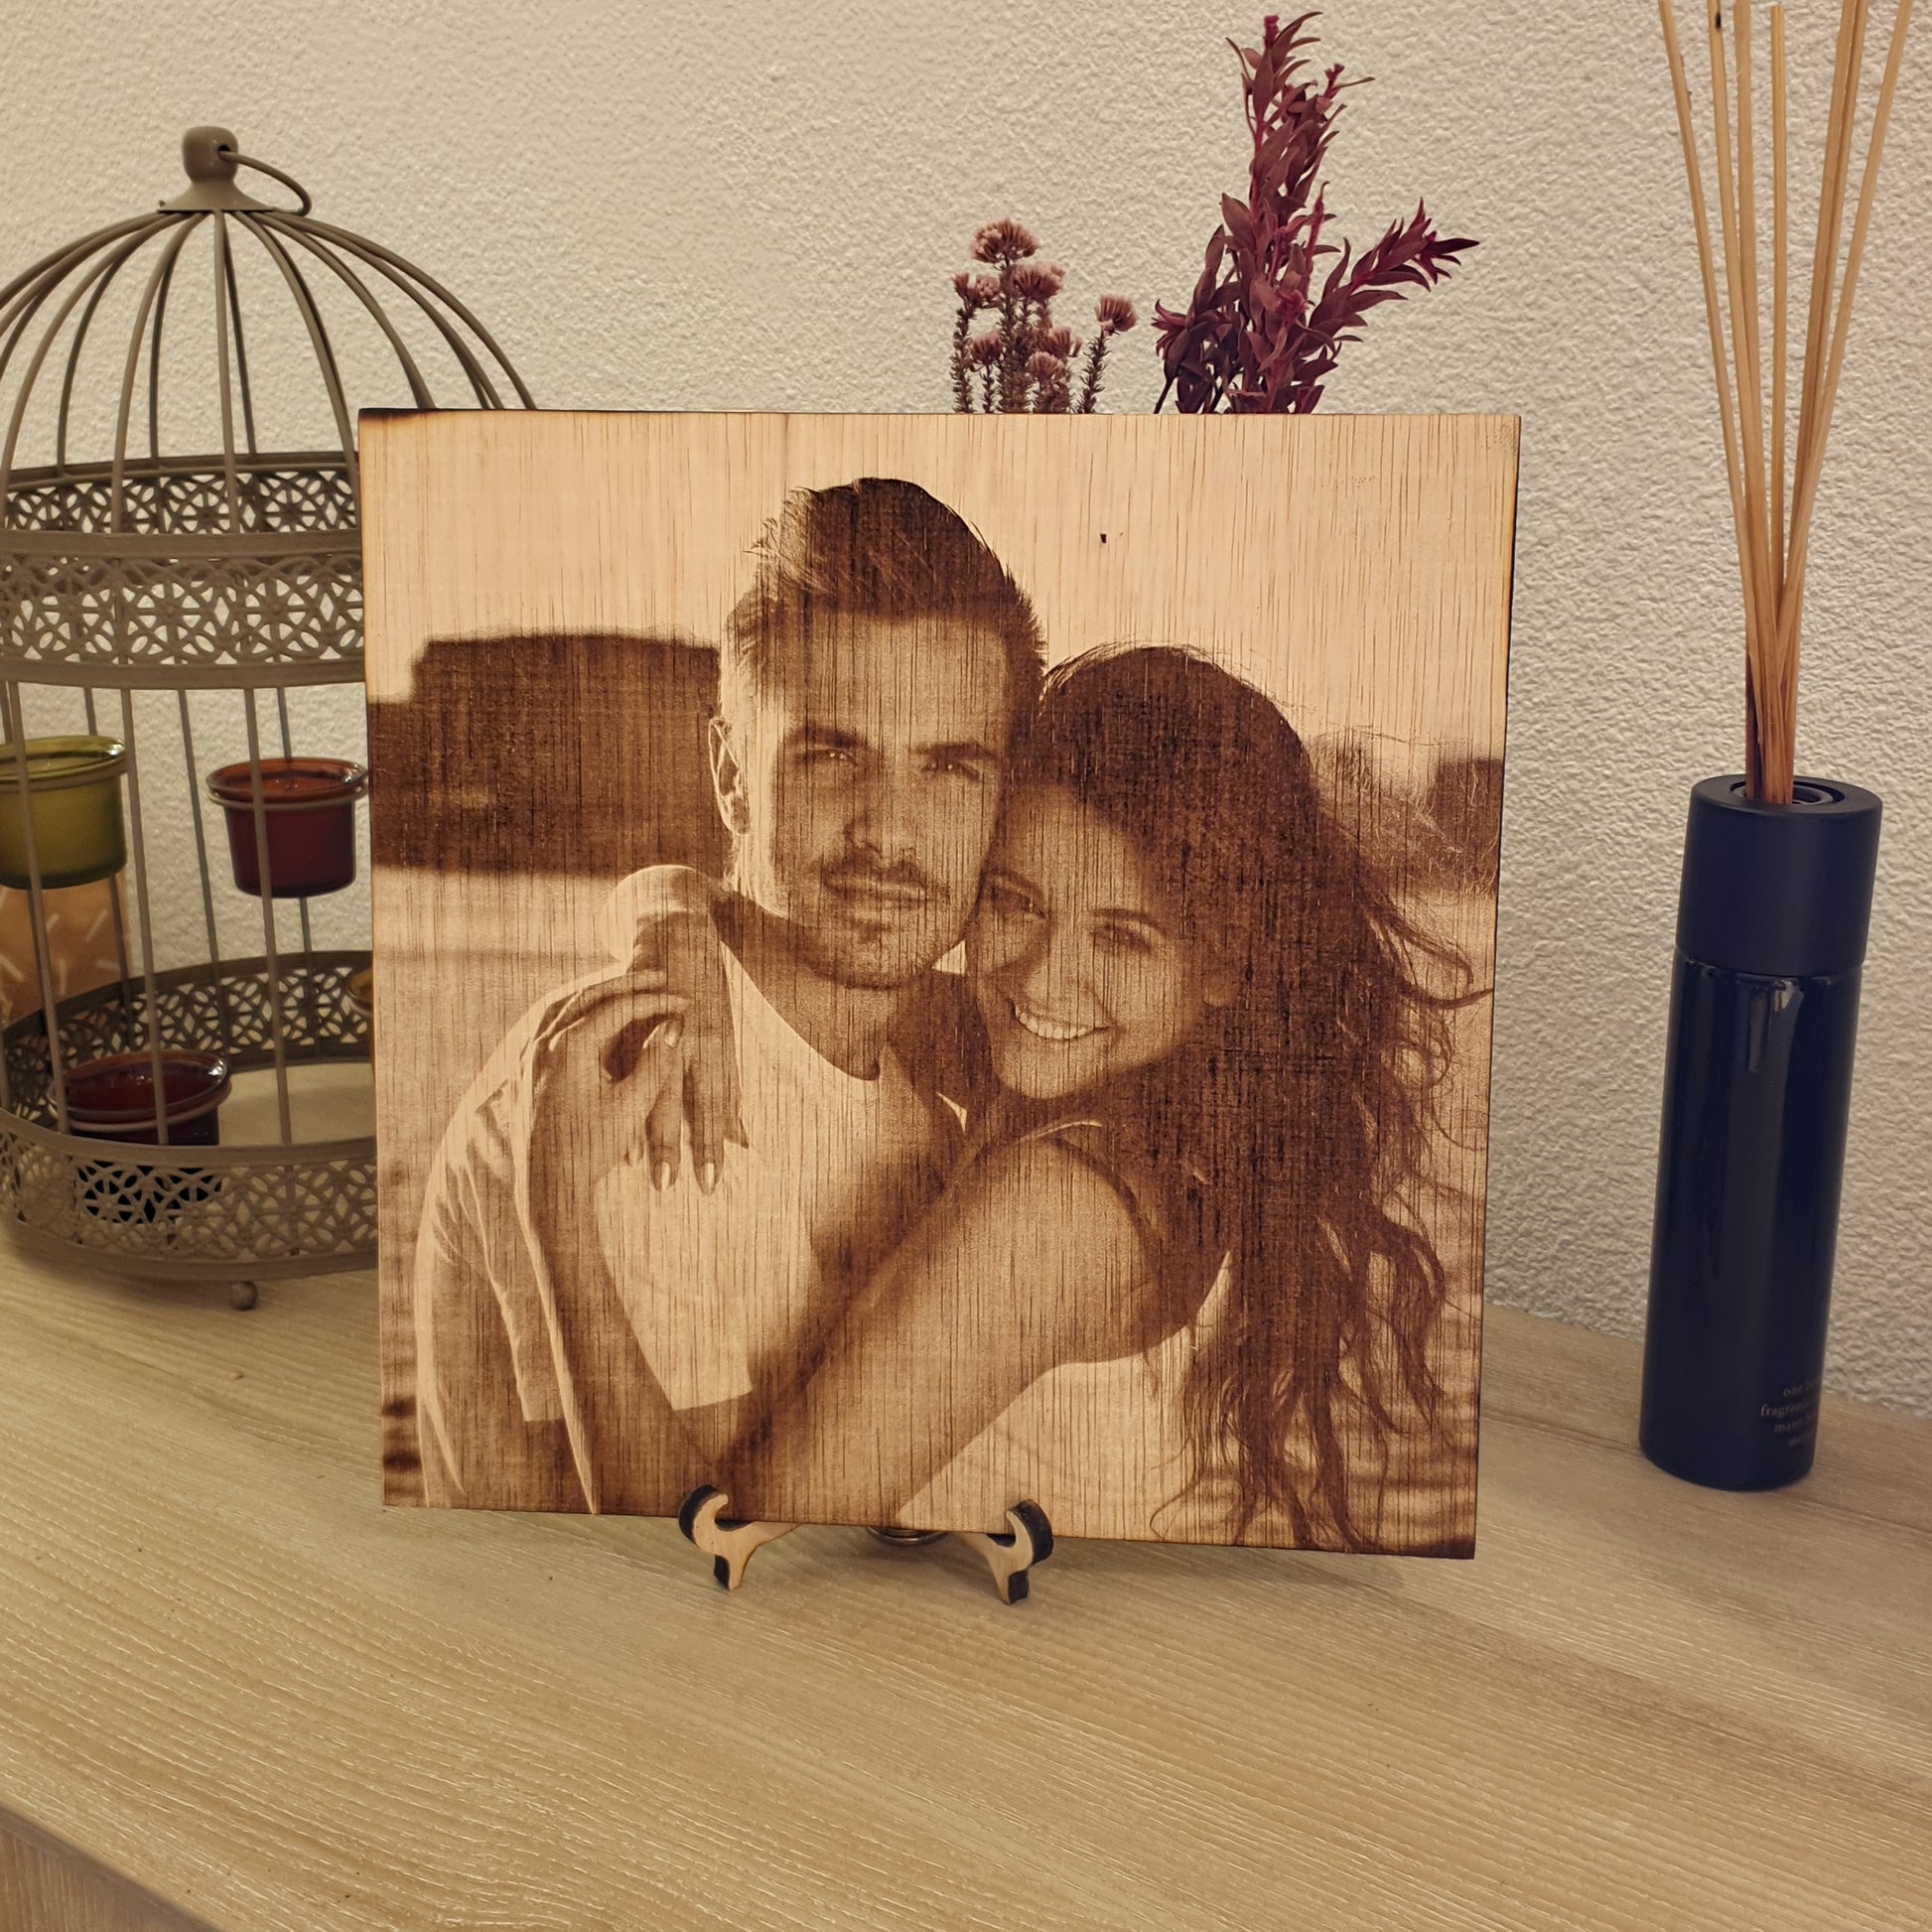 Example of a Family Photo Transferred onto Wood